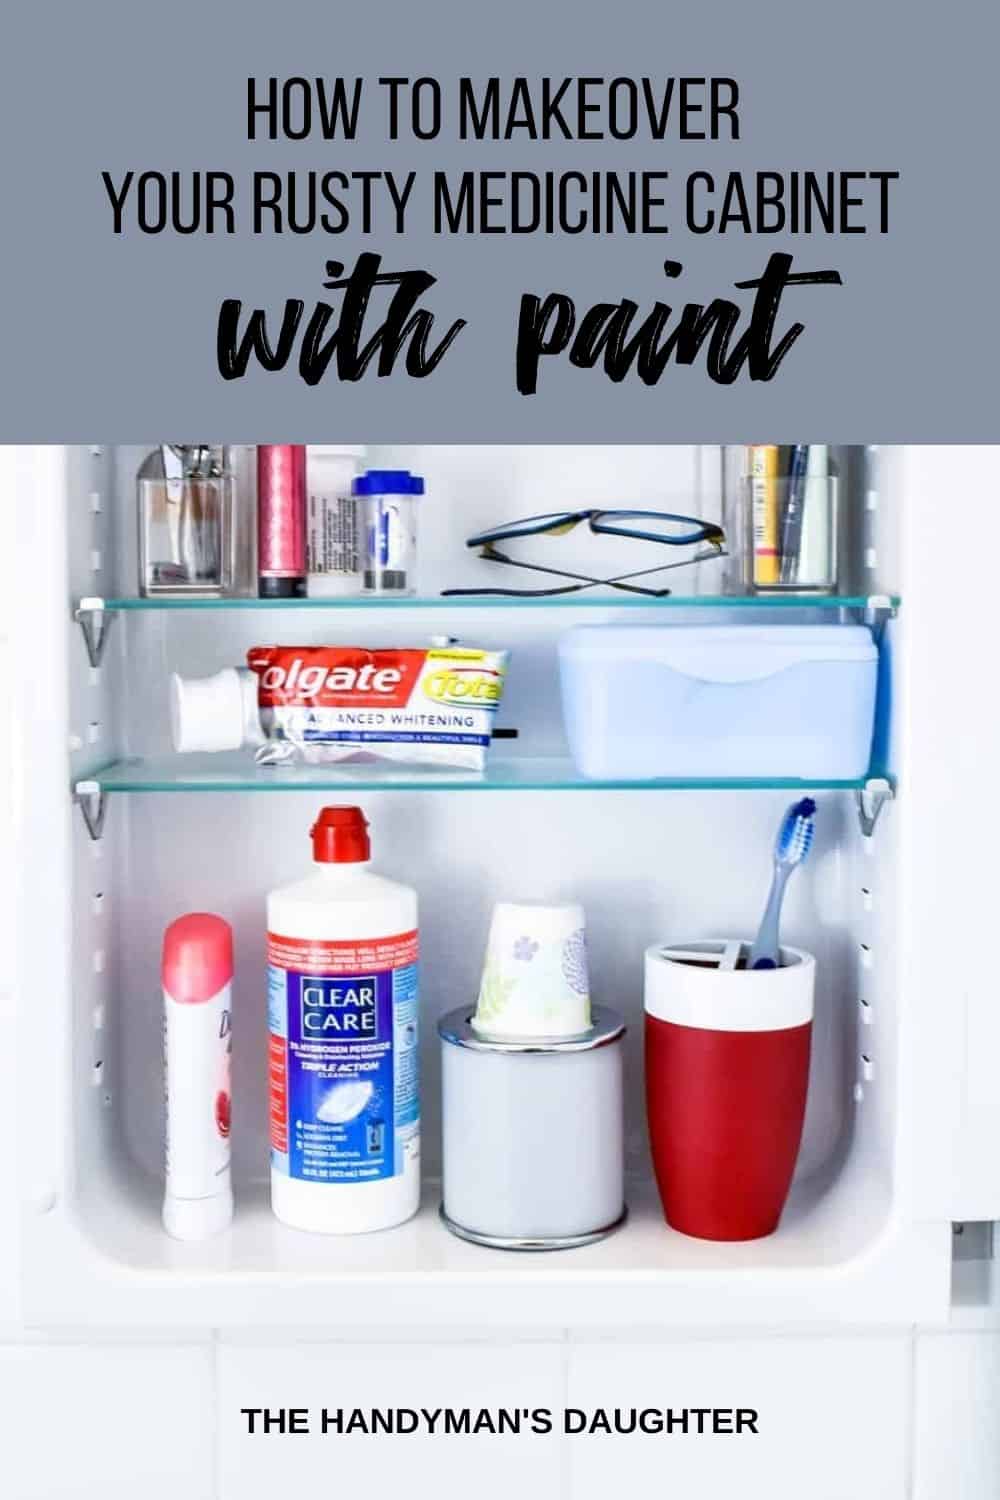 clean, white, organized medicine cabinet with text overlay " how to makeover your rusty medicine cabinet with paint"